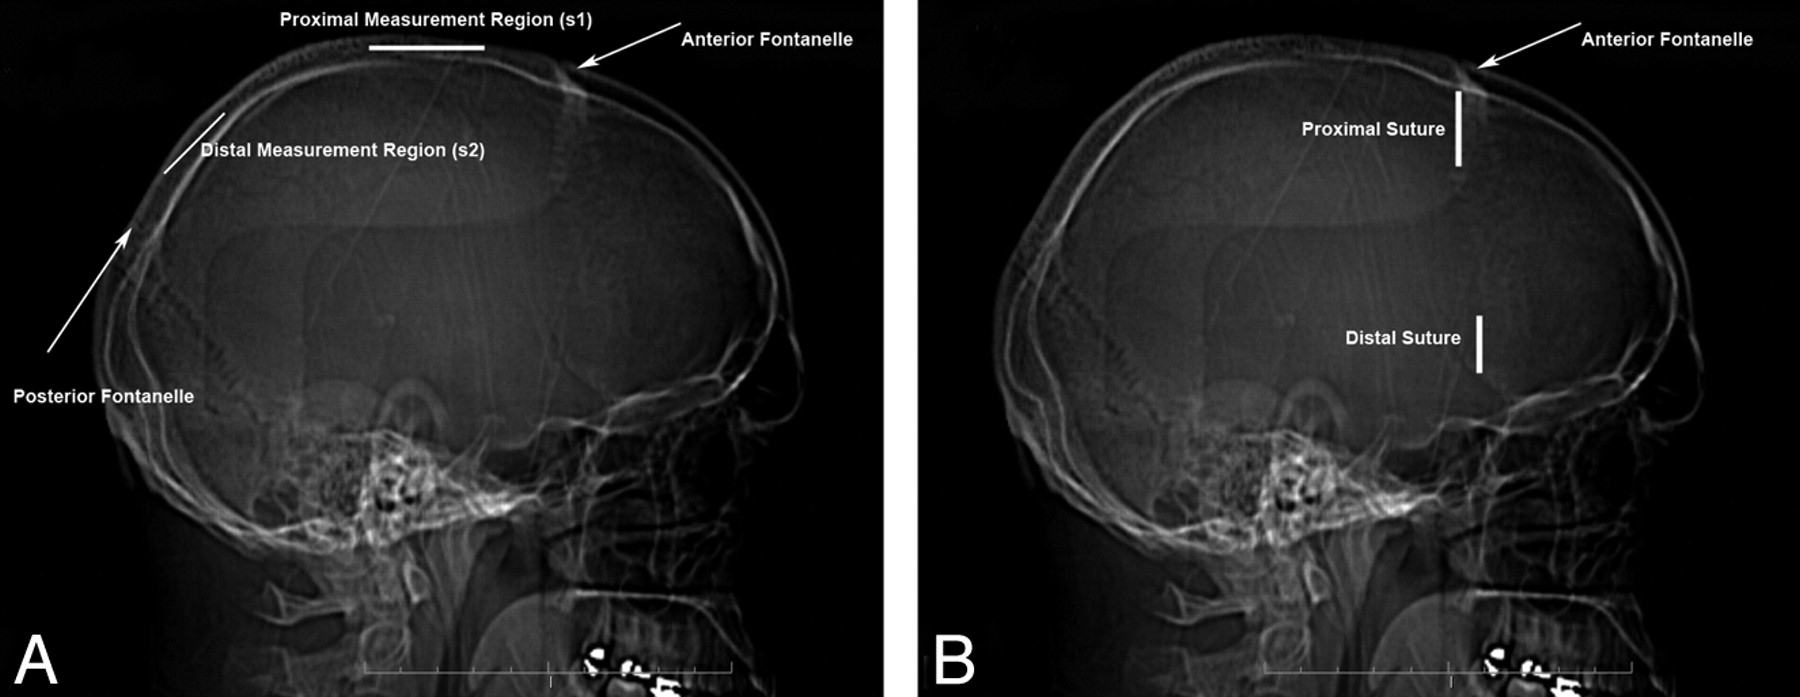 Normal Sagittal And Coronal Suture Widths By Using Ct Imaging